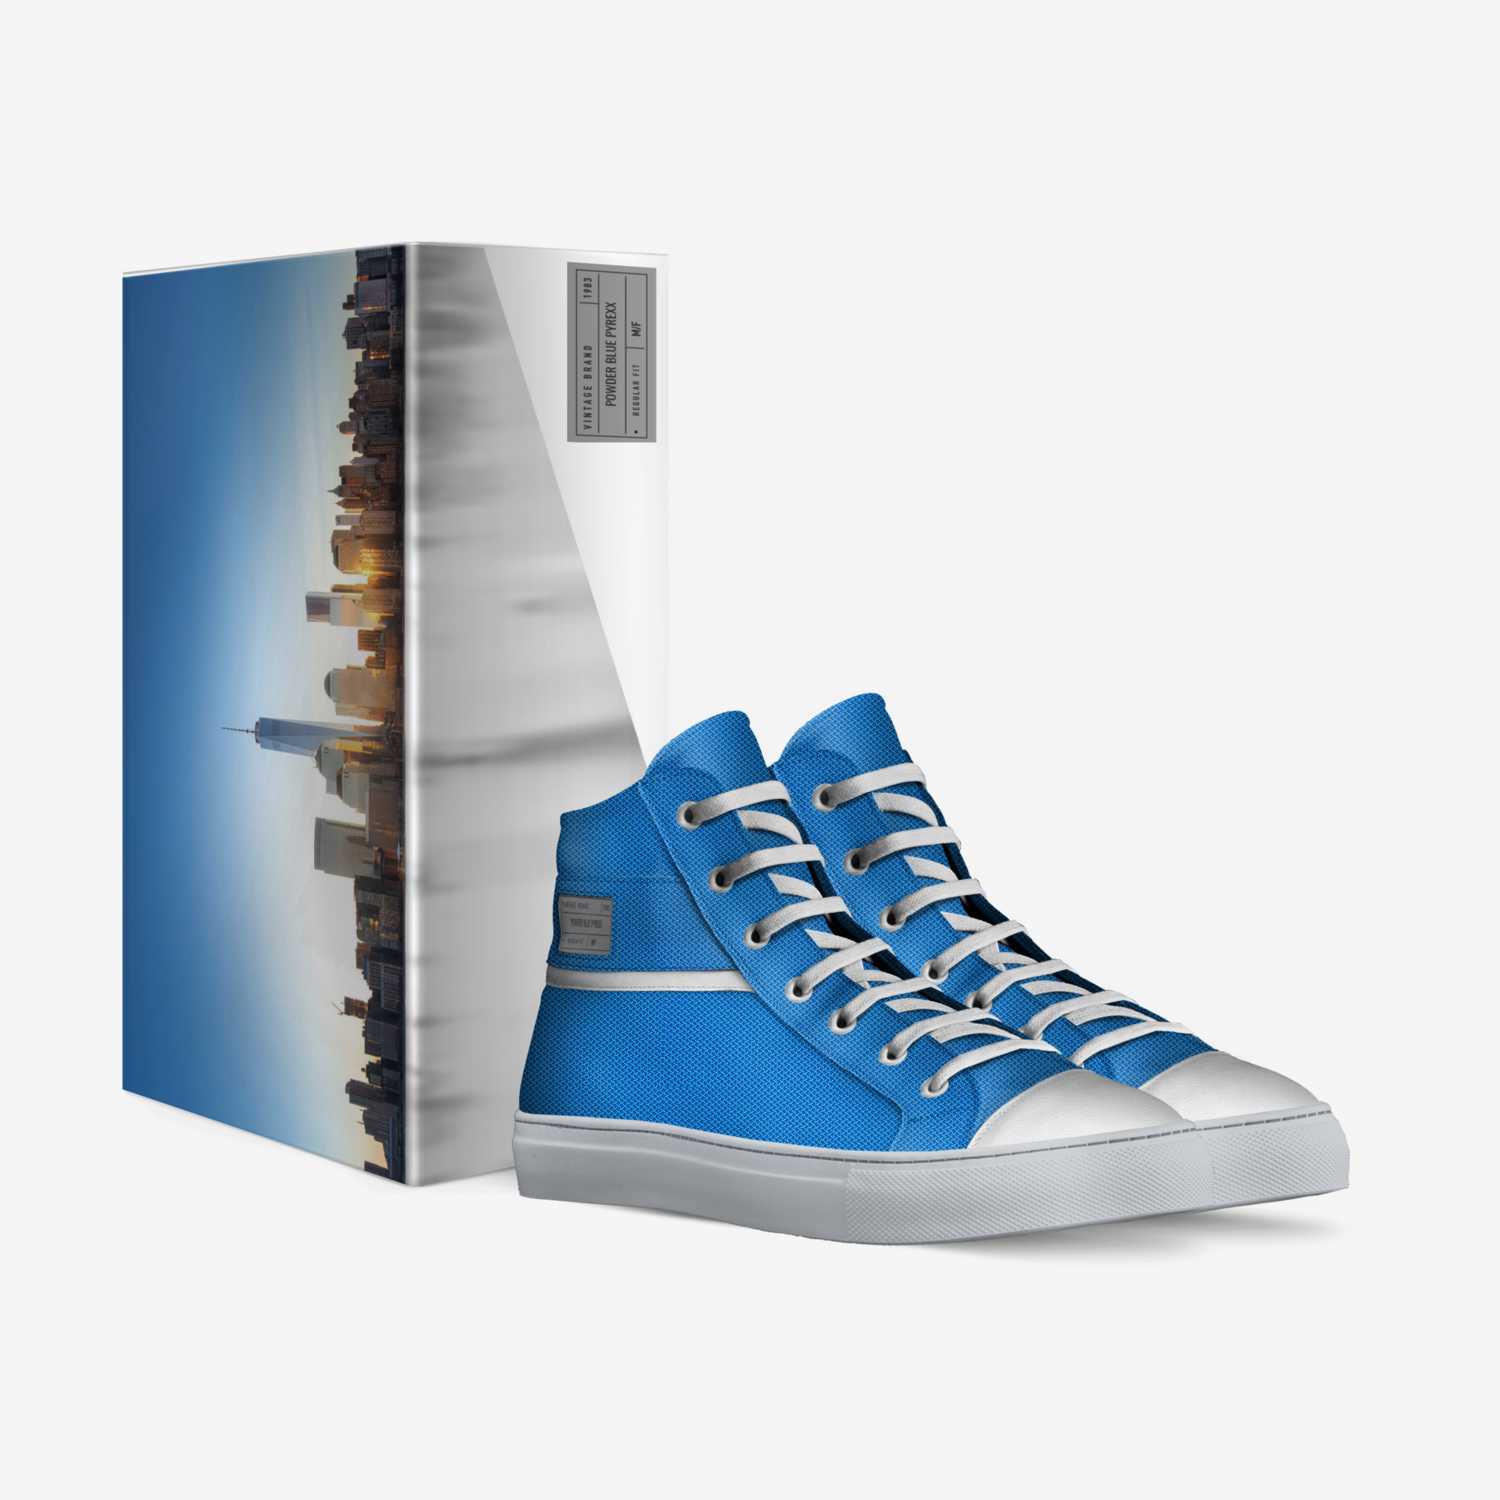 Powder Blue Pyrexx custom made in Italy shoes by Aaron Mitchell | Box view